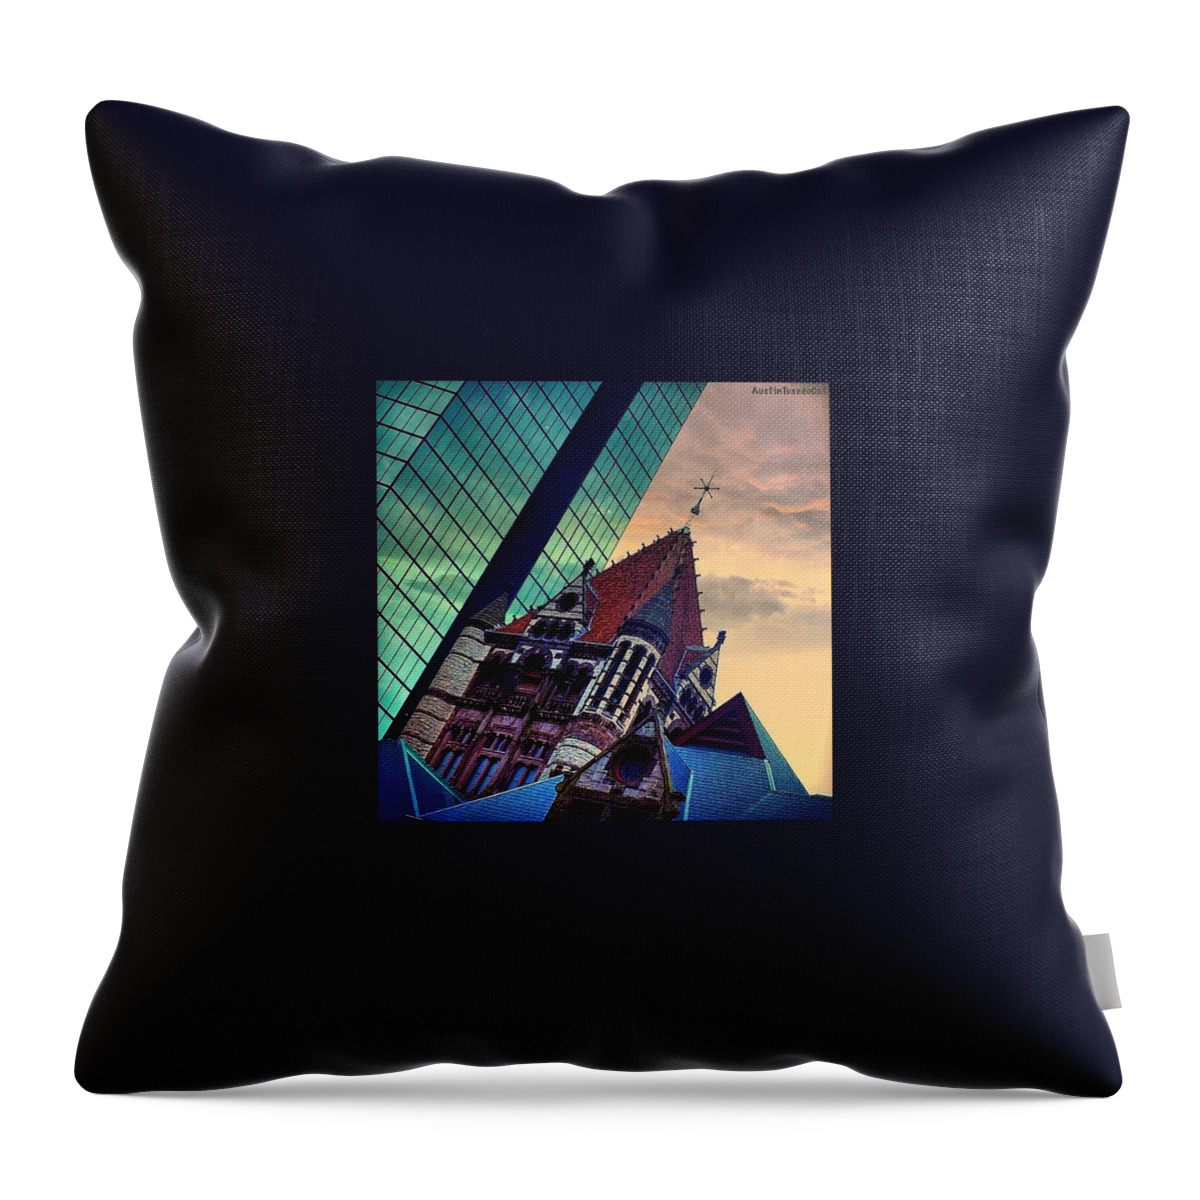 Beautiful Throw Pillow featuring the photograph Photoshopping Throwback Thursday - #1 by Austin Tuxedo Cat